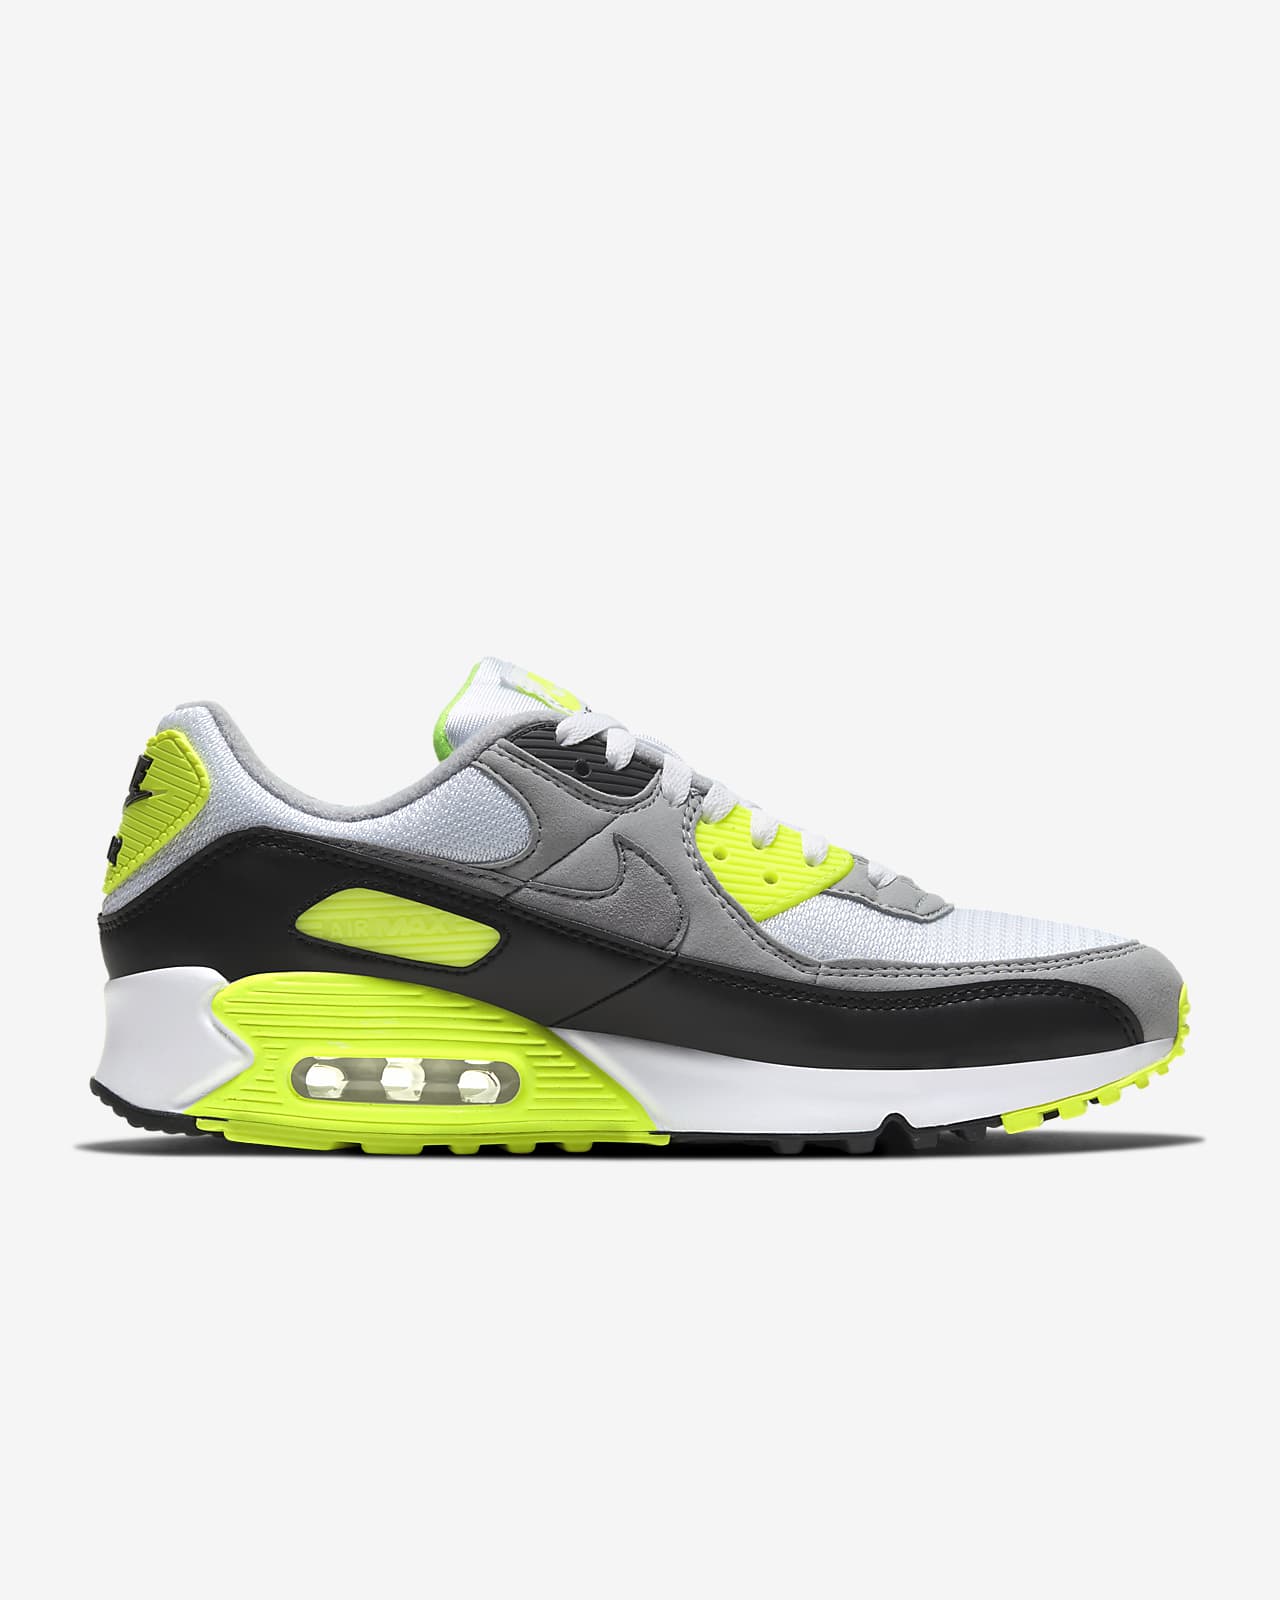 air max 90 for sale philippines